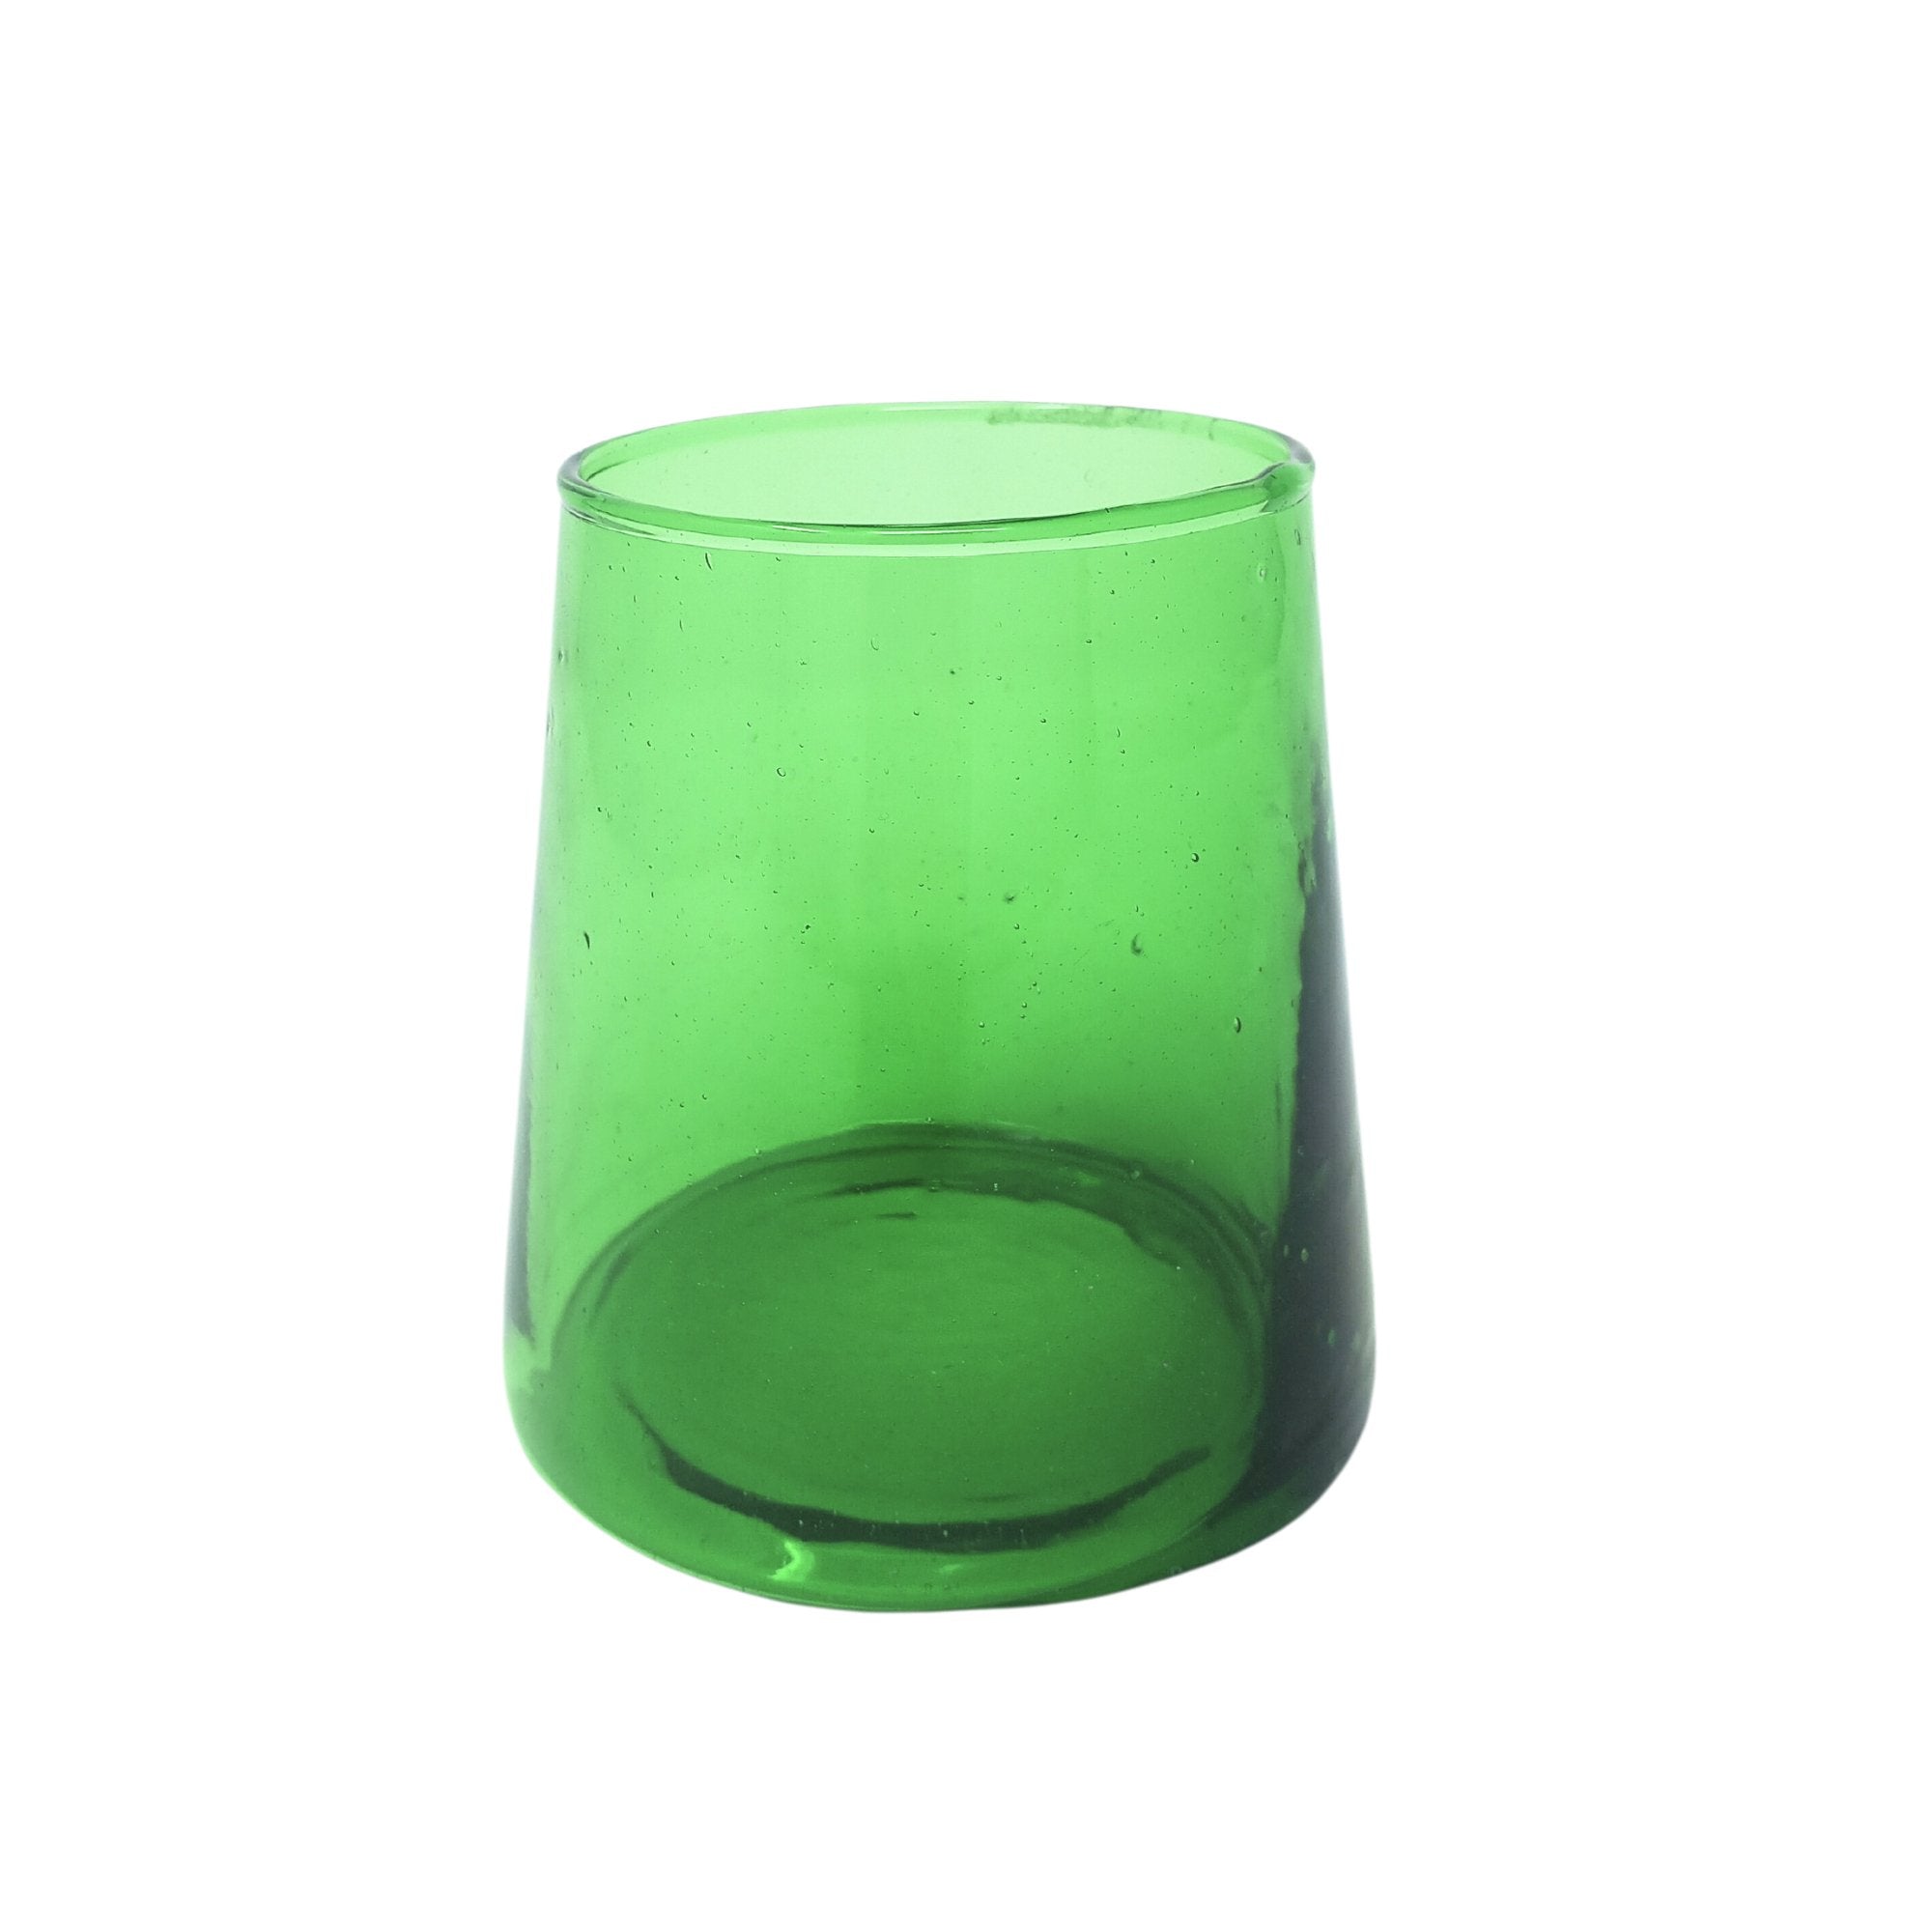 Inverted Recycled Drinking Glass Green - Artisan Stories